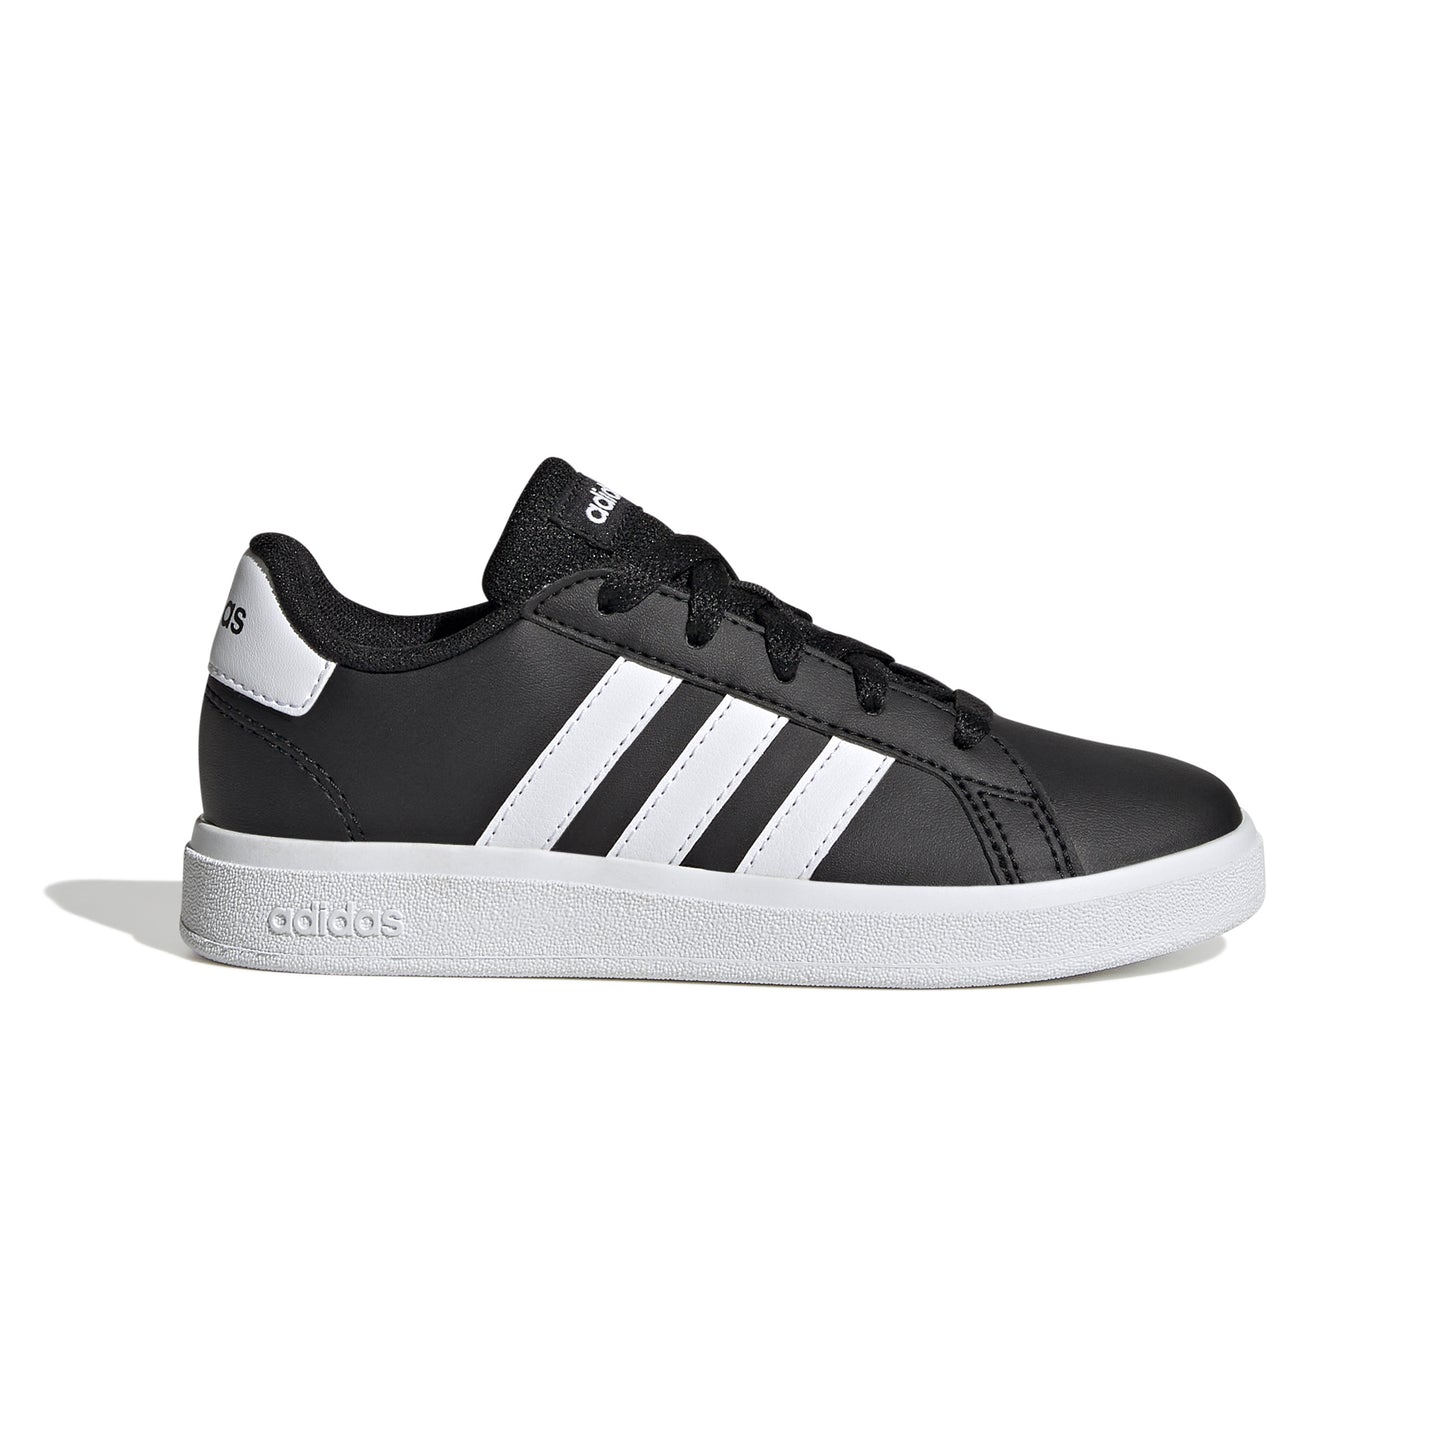 SNEAKERS - ADIDAS GRAND COURT 2.